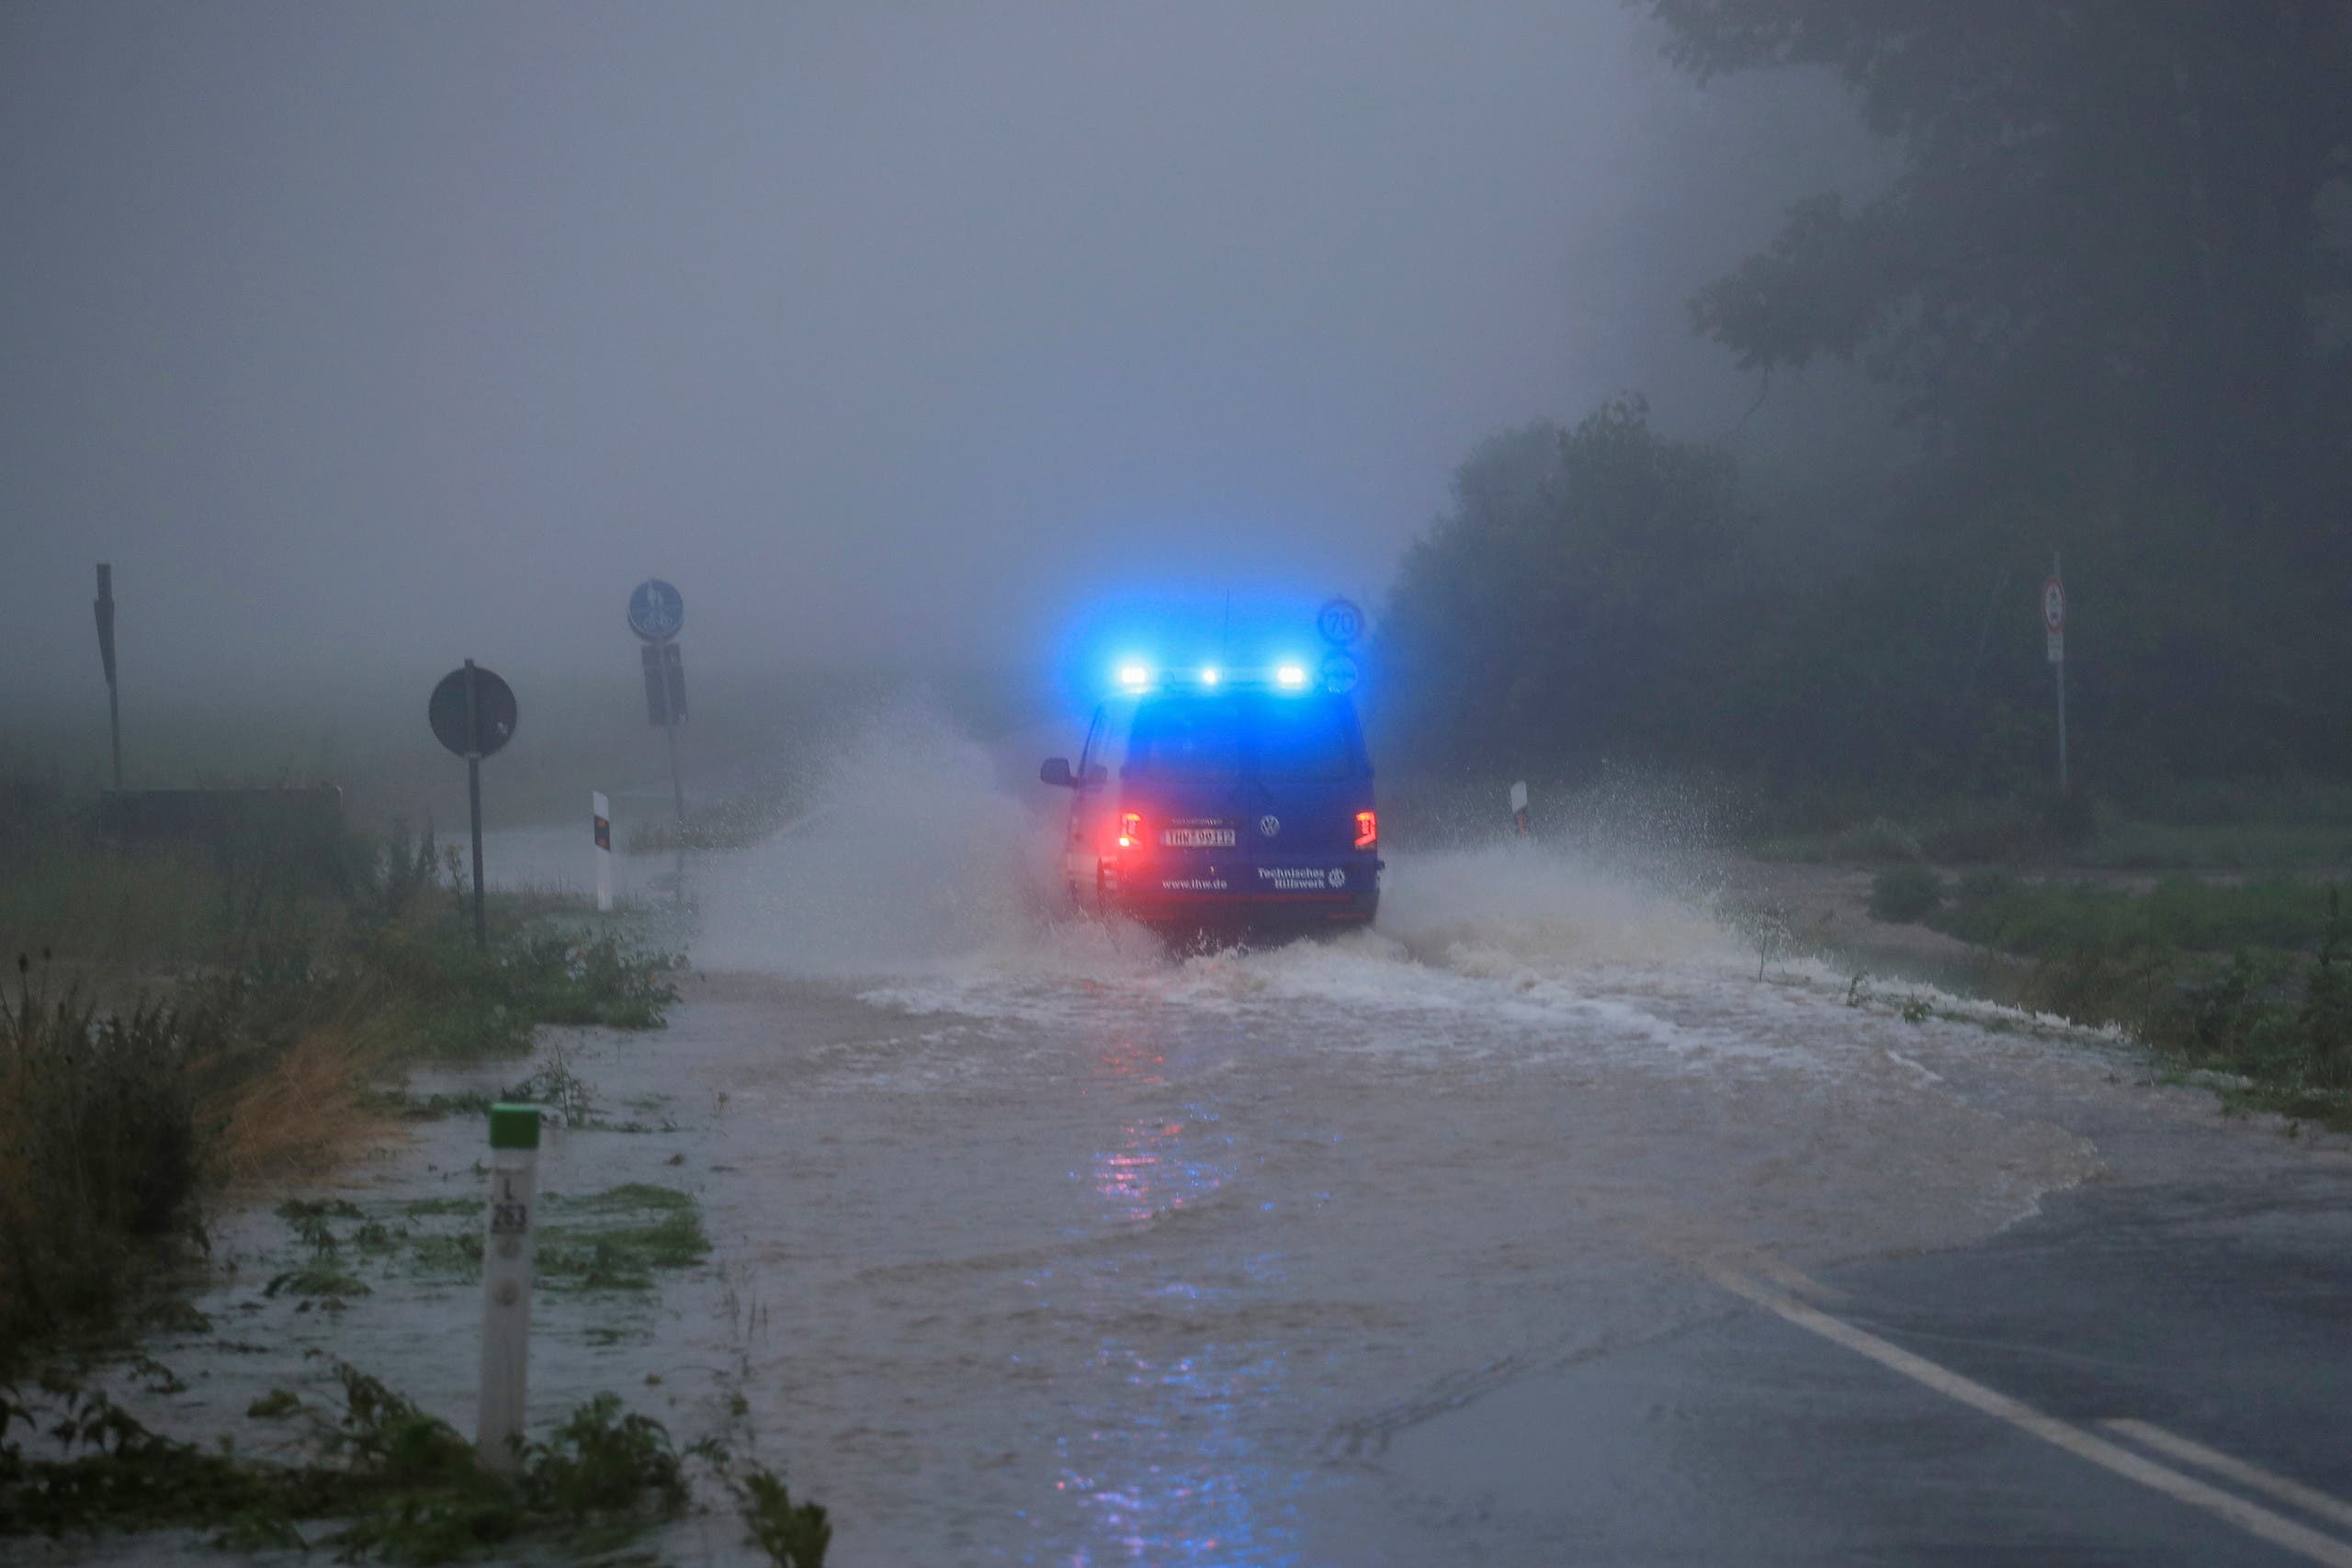 A vehicle travels on a flood affected road after the Erft river swelled following heavy rainfalls in Erftstadt, near Cologne, Germany, July 15, 2021. (Reuters)